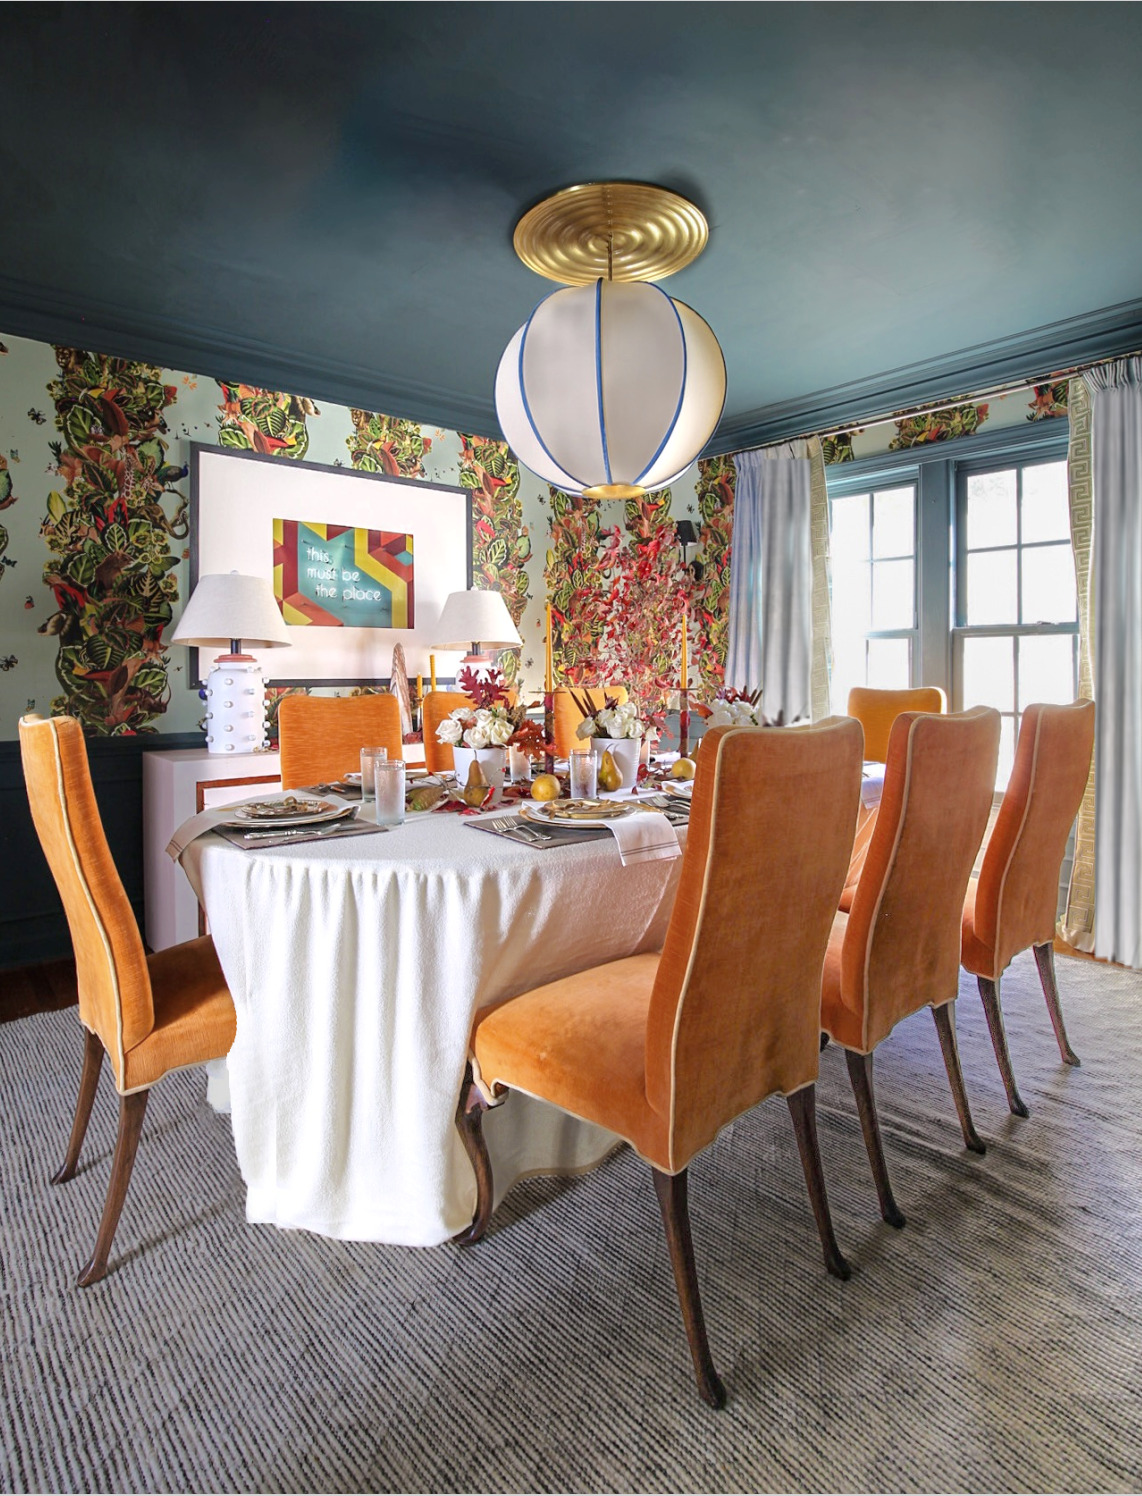 Orange dining chairs, maximalist dining room, eclectic, inchyra blue